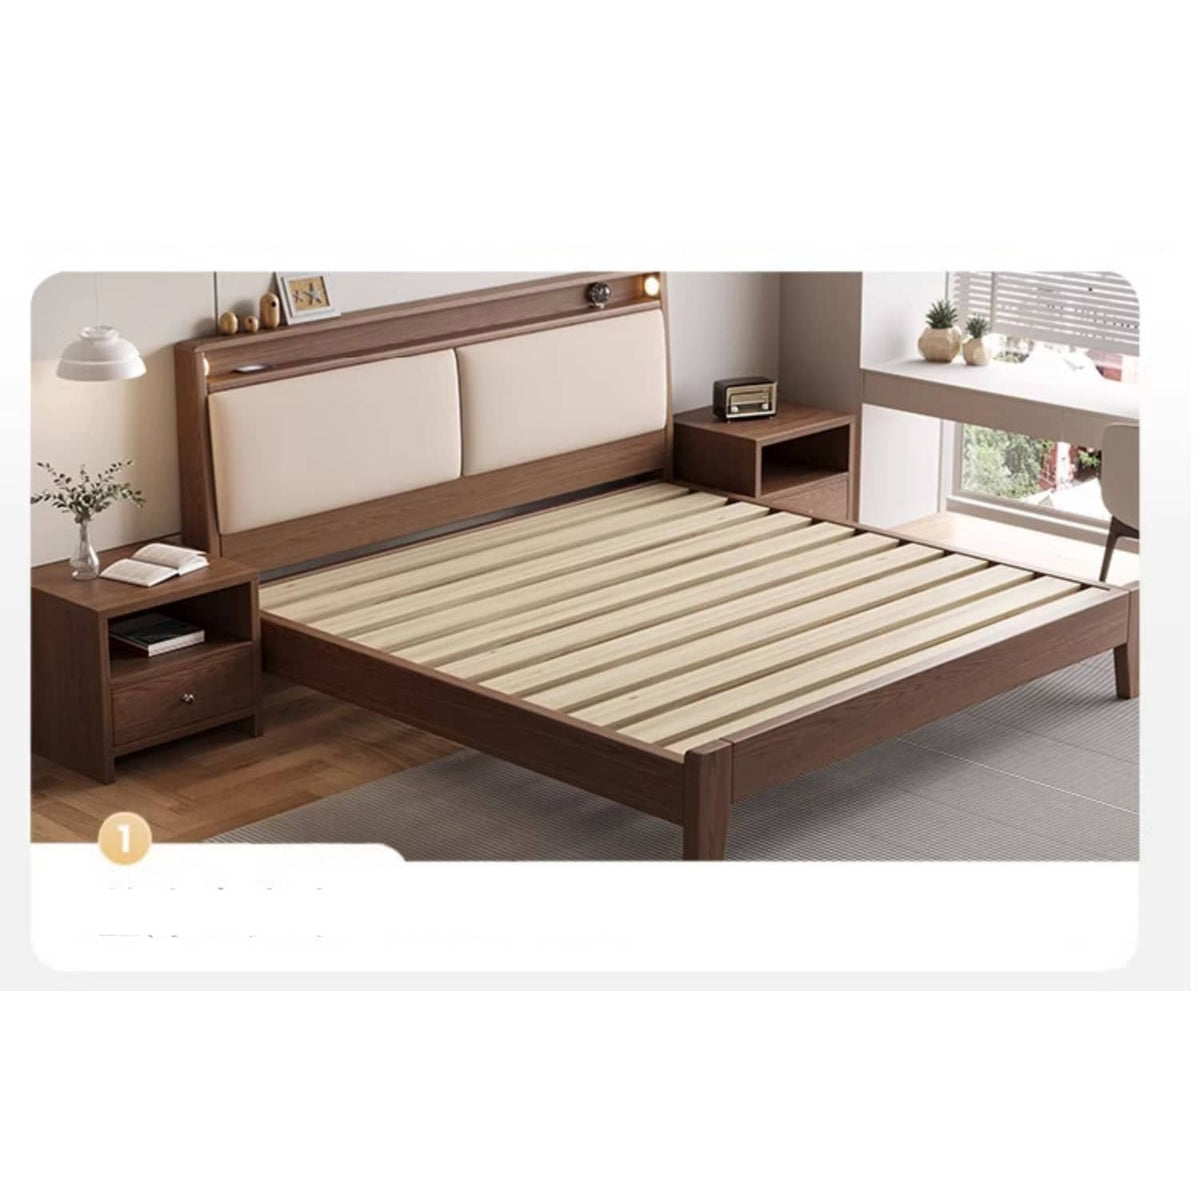 Luxurious Bed Frame in Brown Rubber Wood and Pine - Sturdy & Elegant Design hmak-240